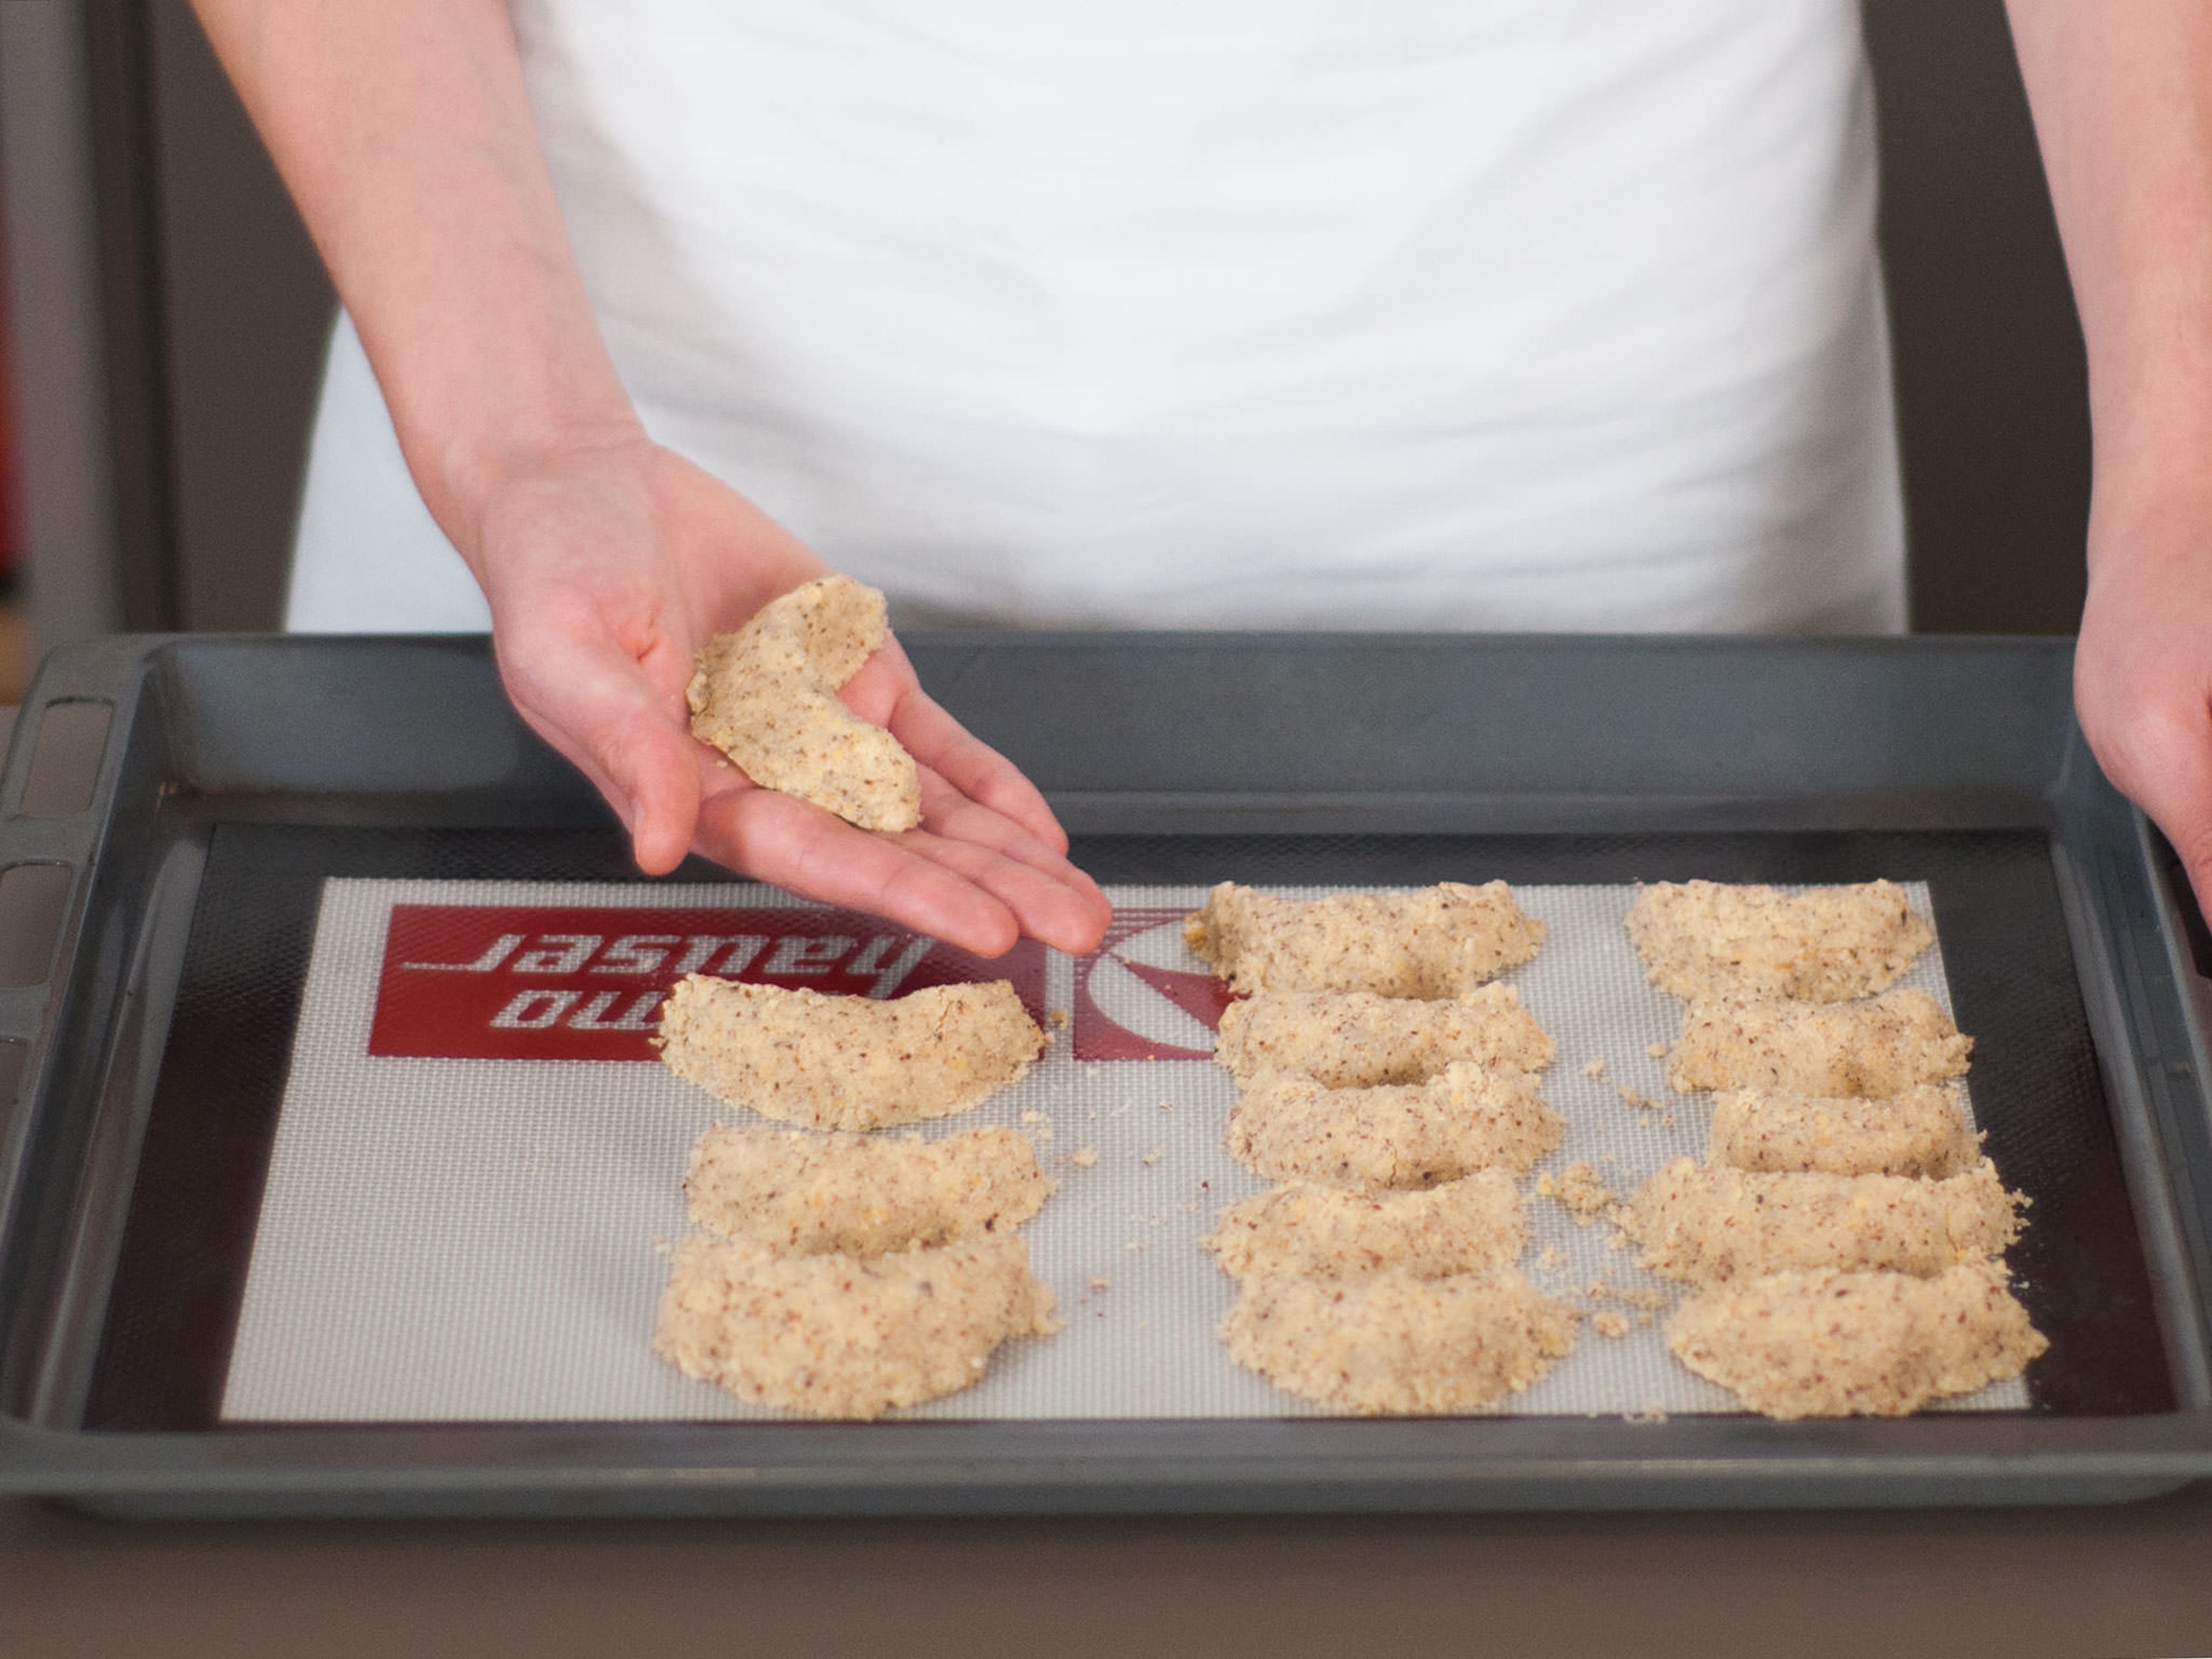 Knead dough to a ball and then form crescent shaped cookies. Place on a lined baking sheet and bake in a preheated oven at 170°C/335°F for approx. 8 – 10 min.